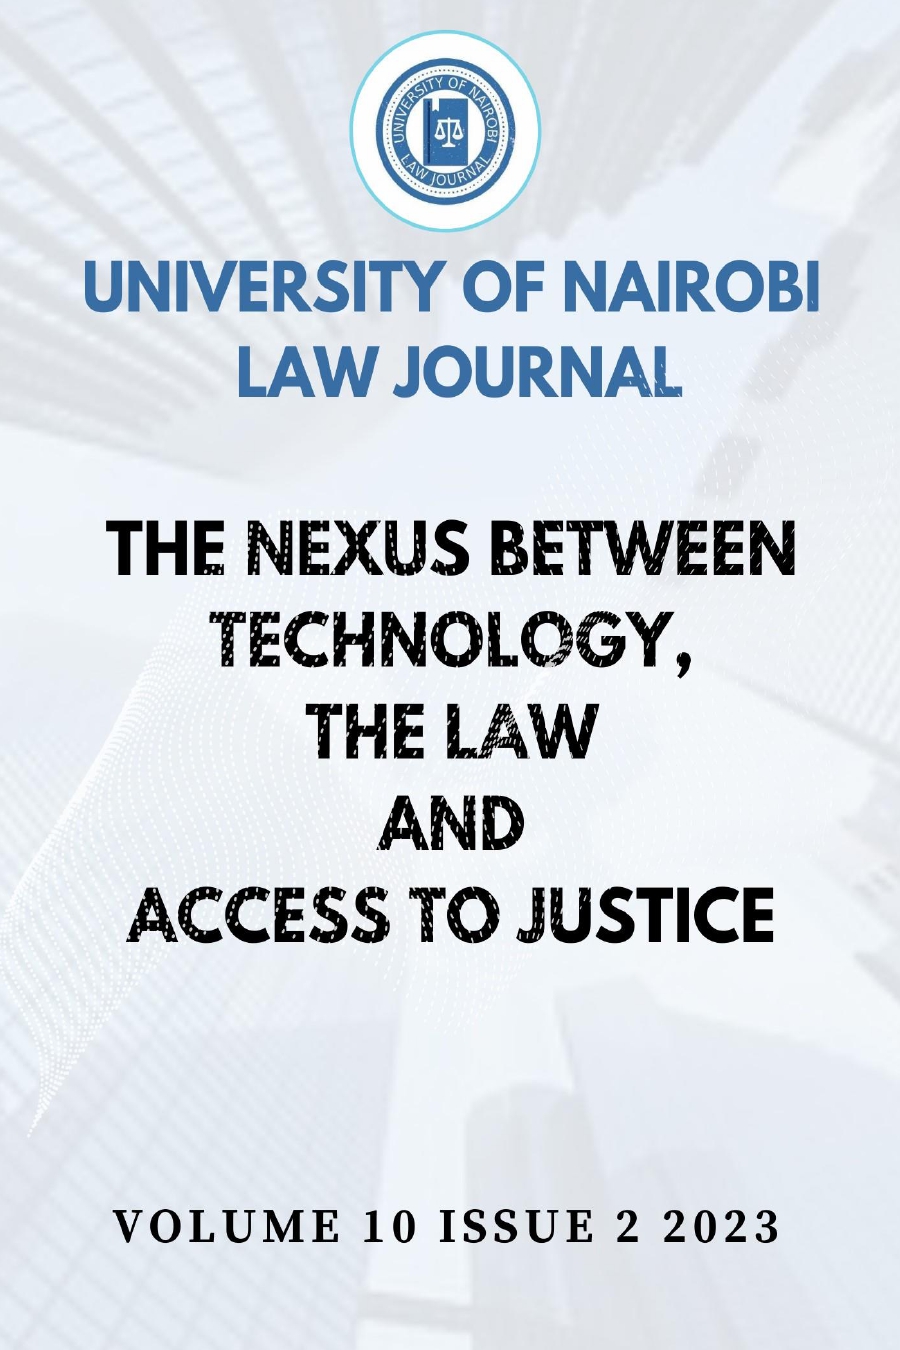 The Nexux Between Technology, the Law and Access to Justice by University of Nairobi Law Journal